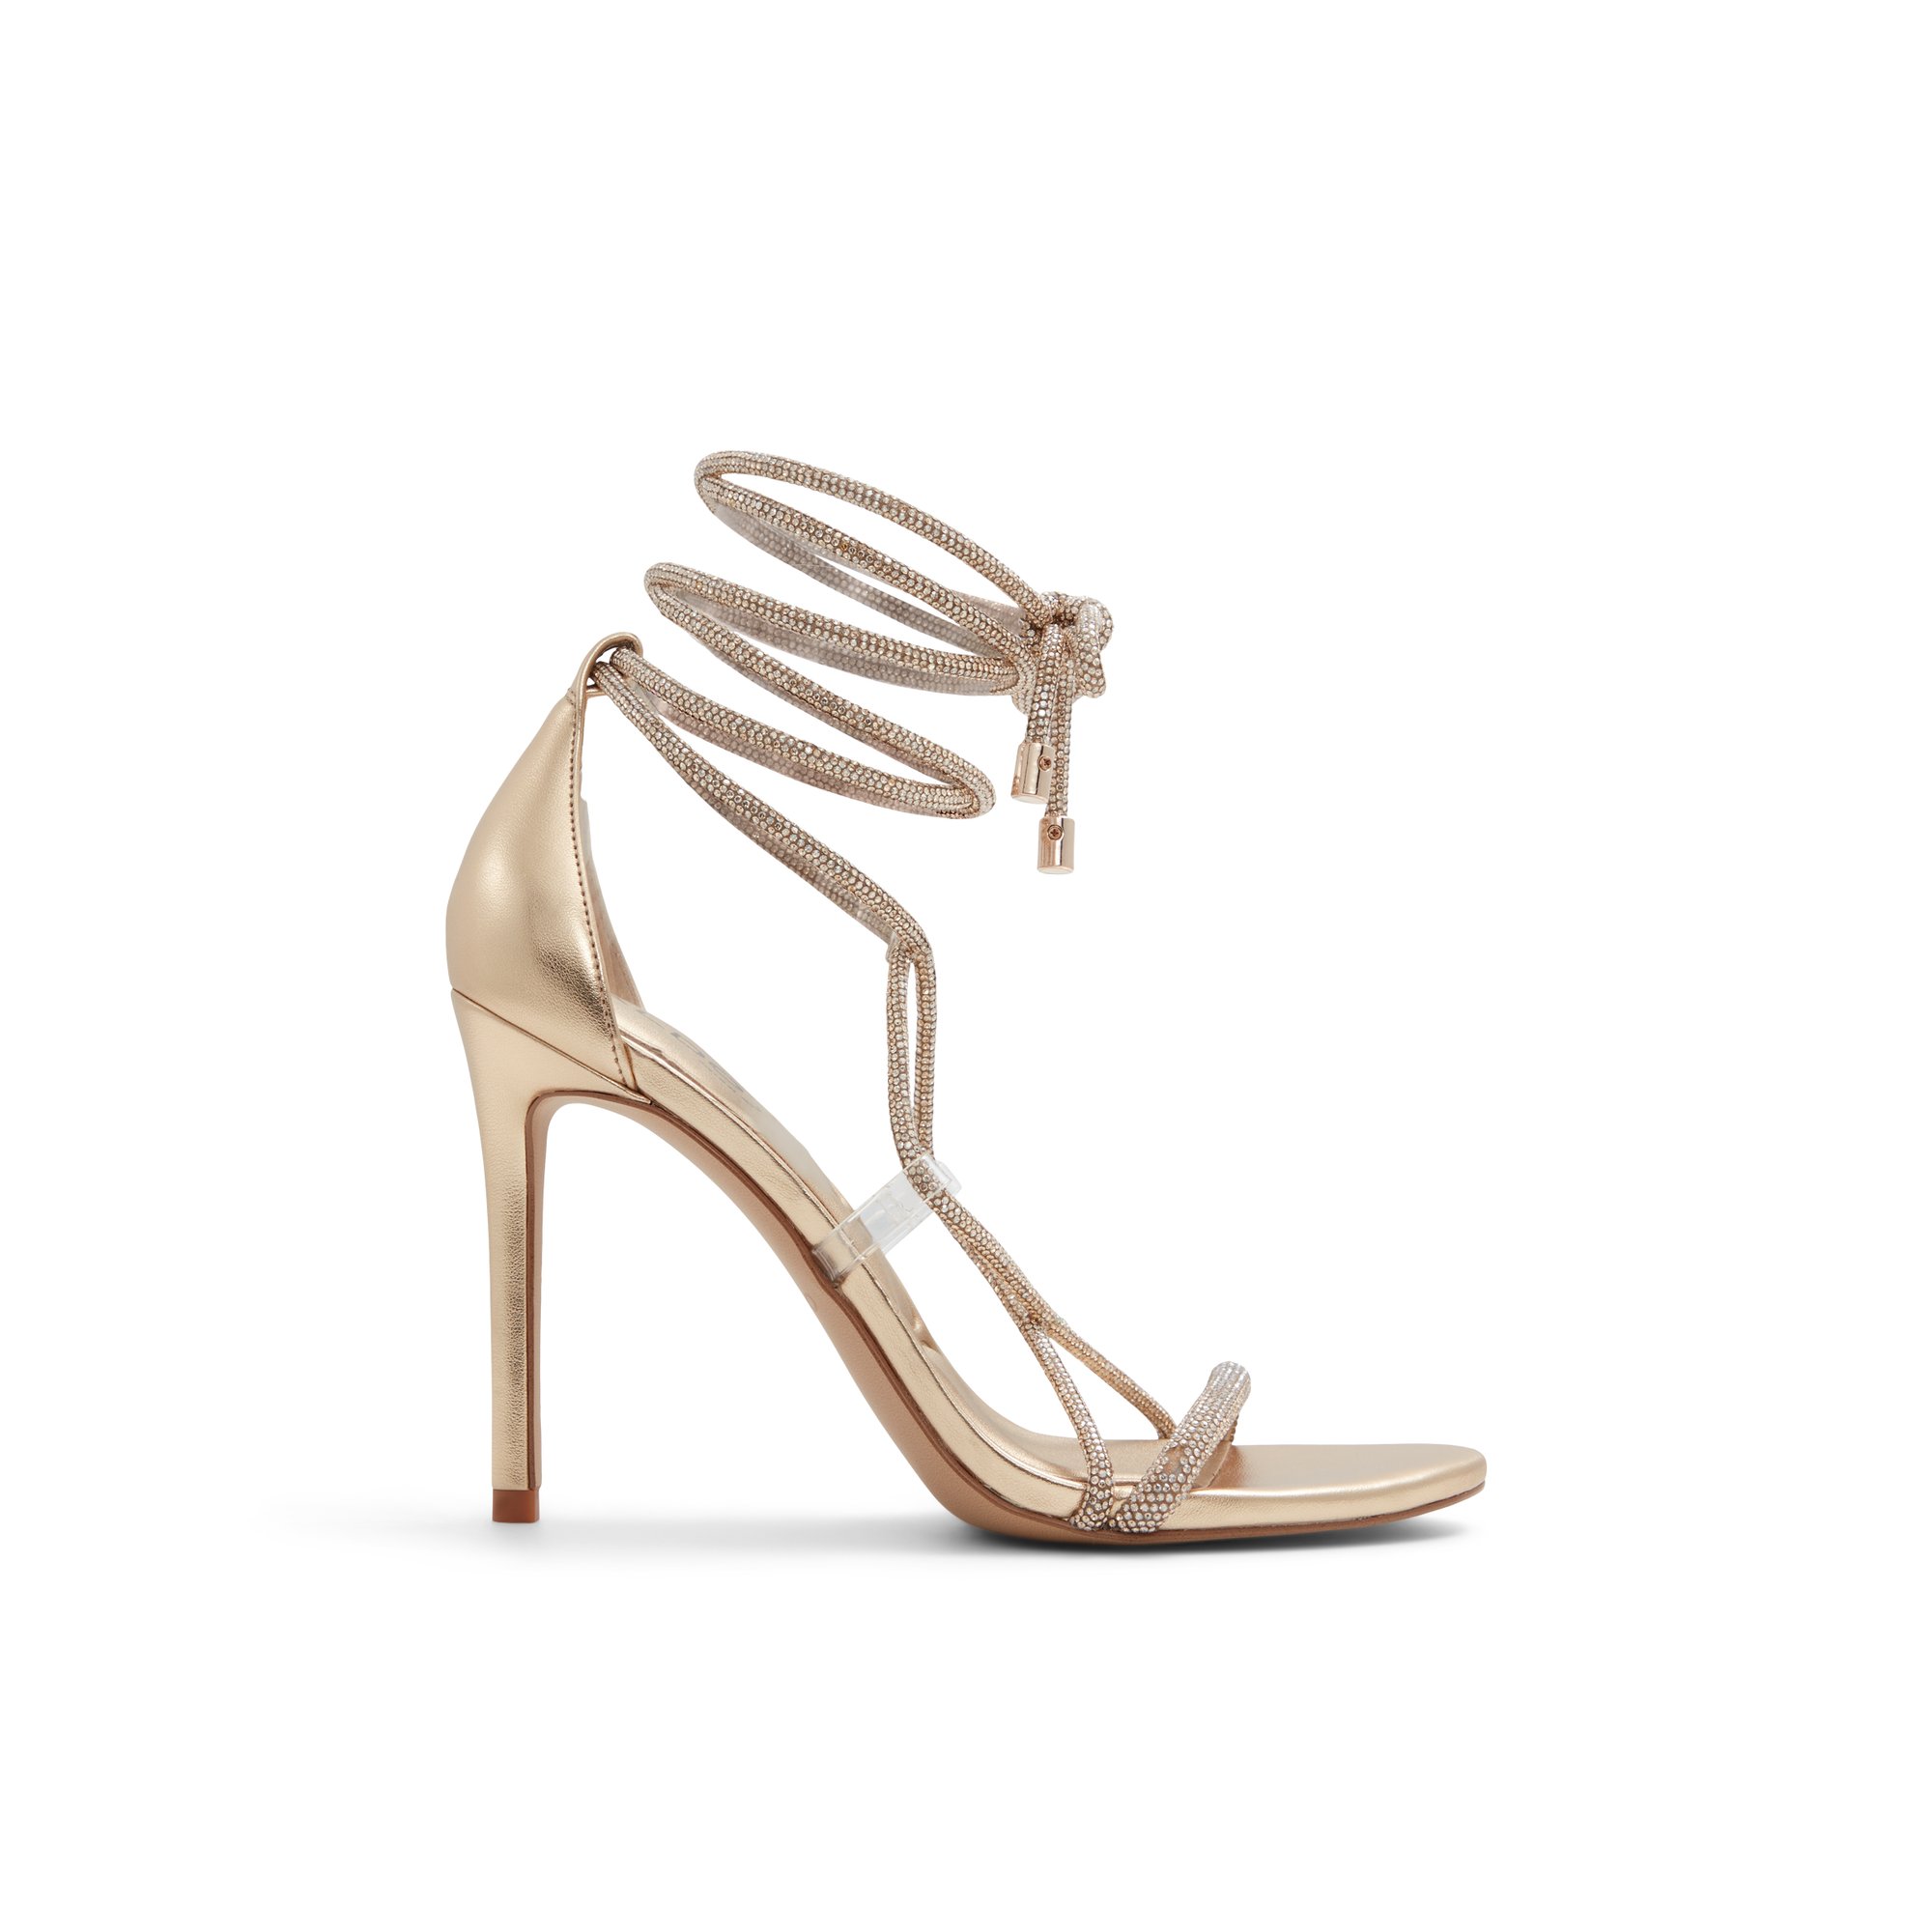 ALDO Marly - Women's Strappy Sandal Sandals - Gold